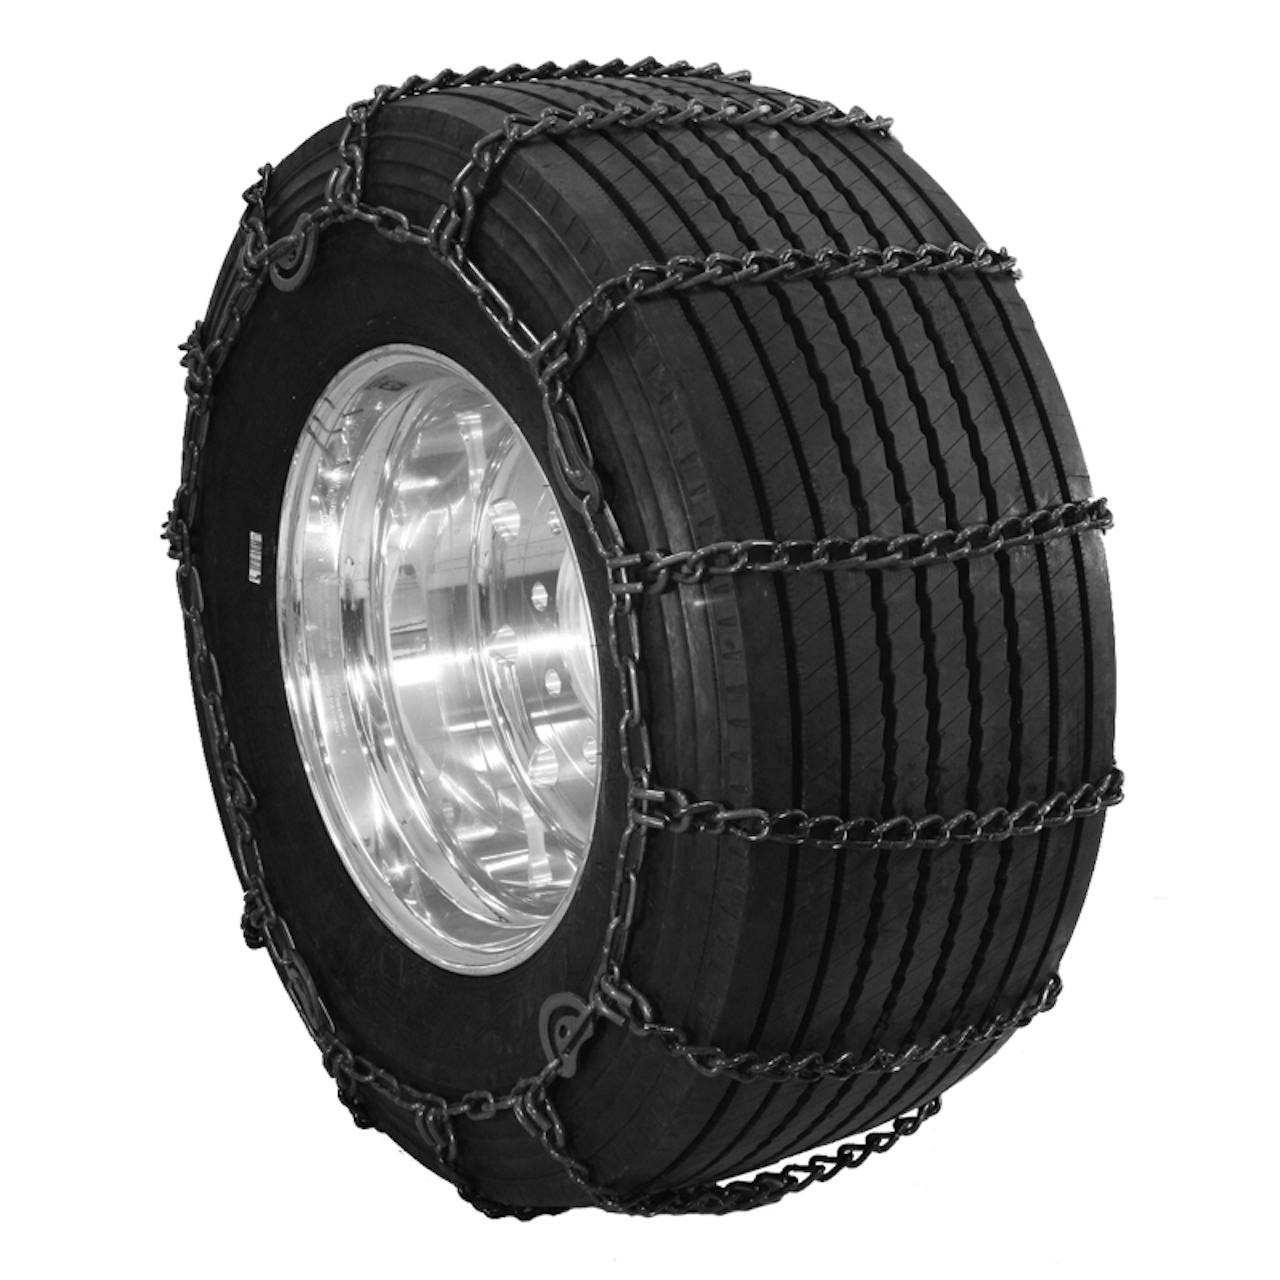 11-24.5 Tire Chains Dual Round Twisted